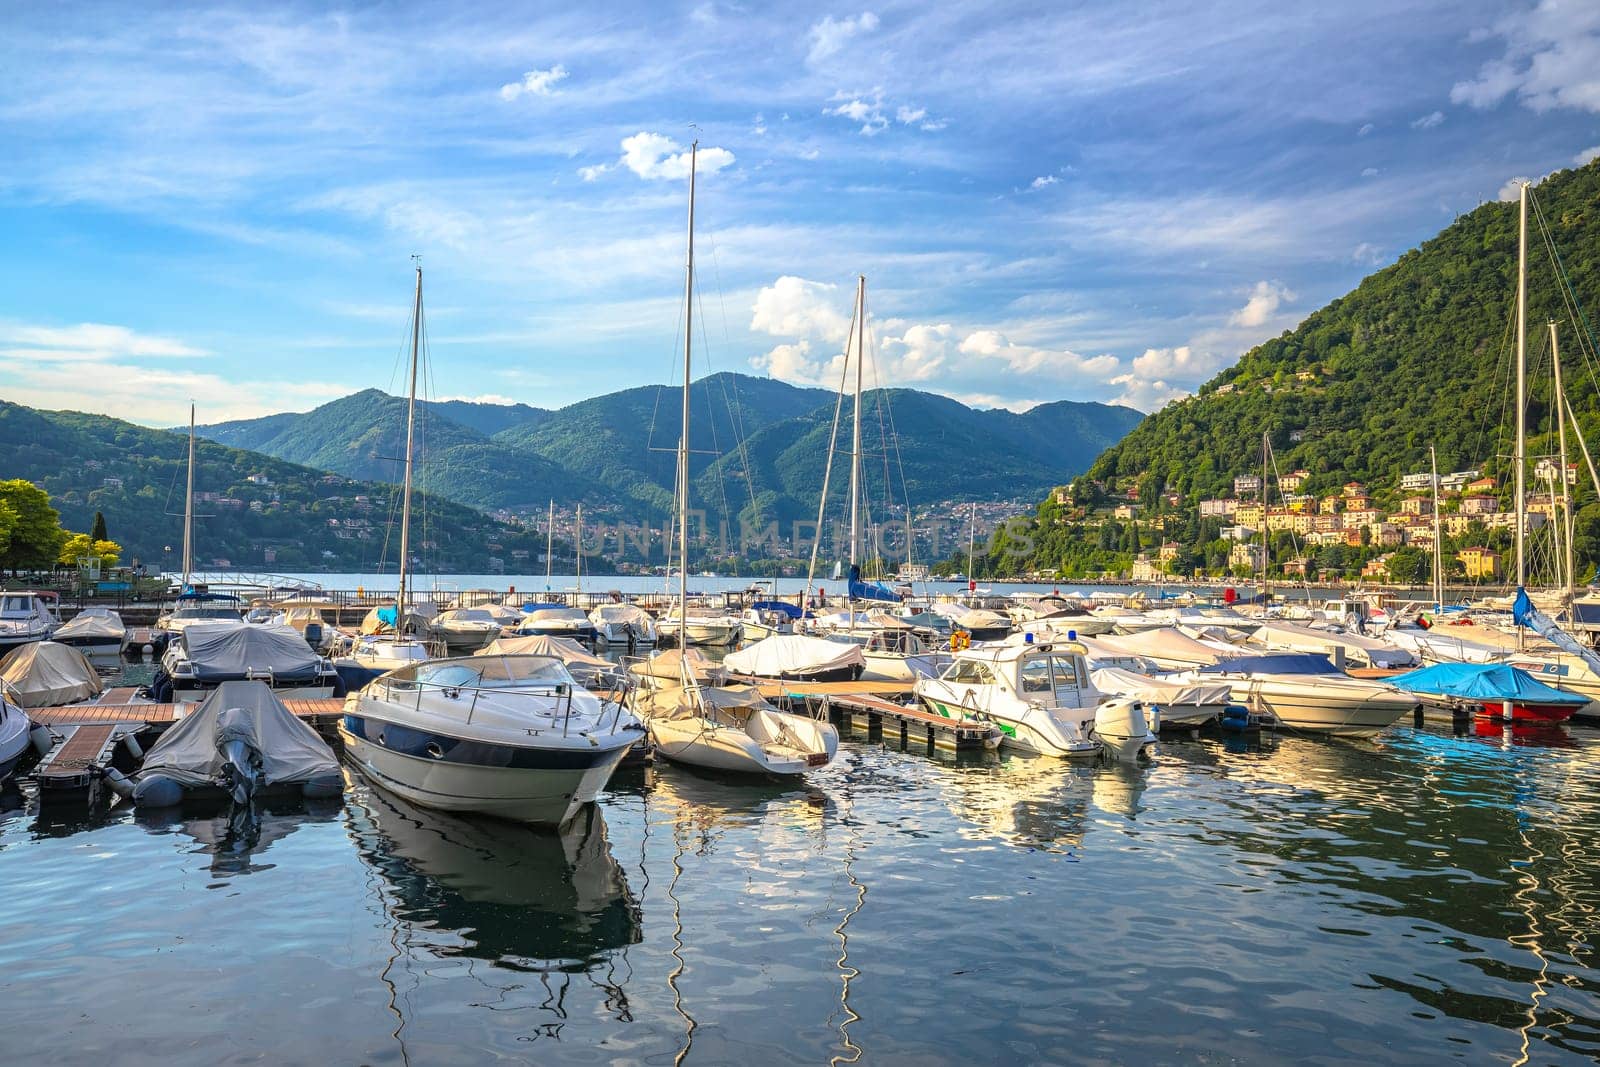 Town of Como waterfront and marina view, Como Lake in Lombardy region of Italy